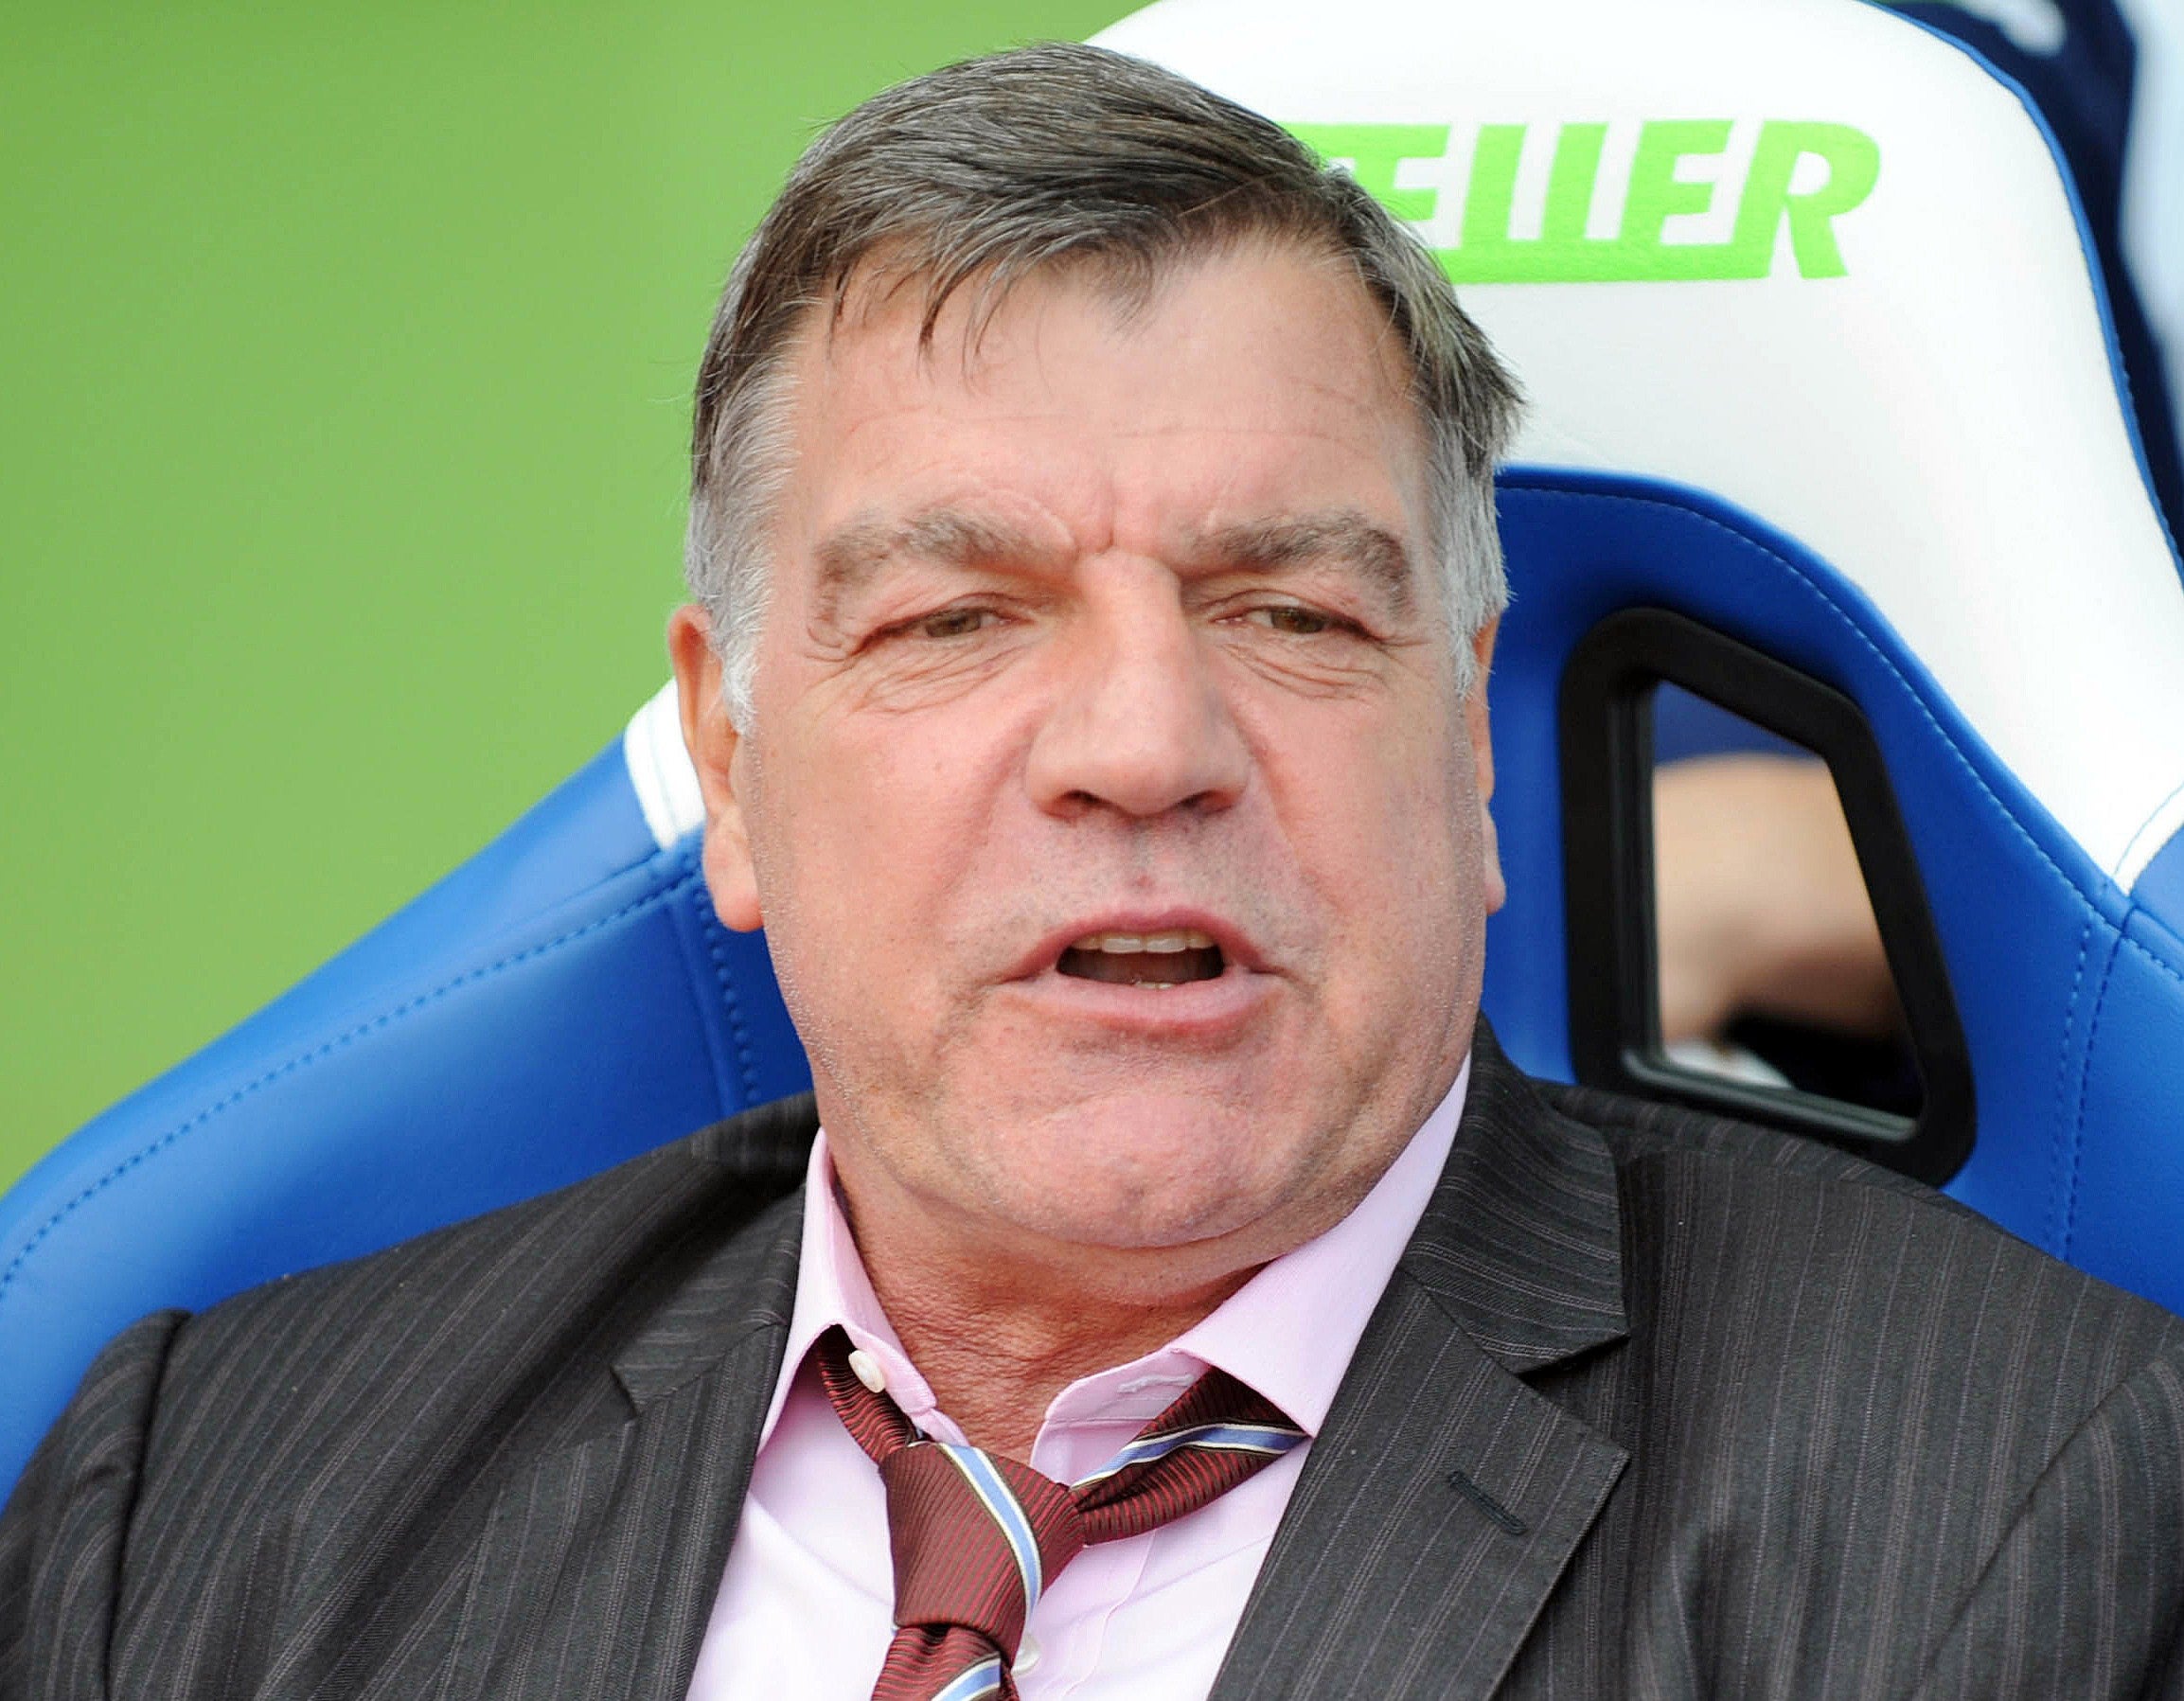 Sam Allardyce will have enjoyed this victory as supporters continue to call for his head.